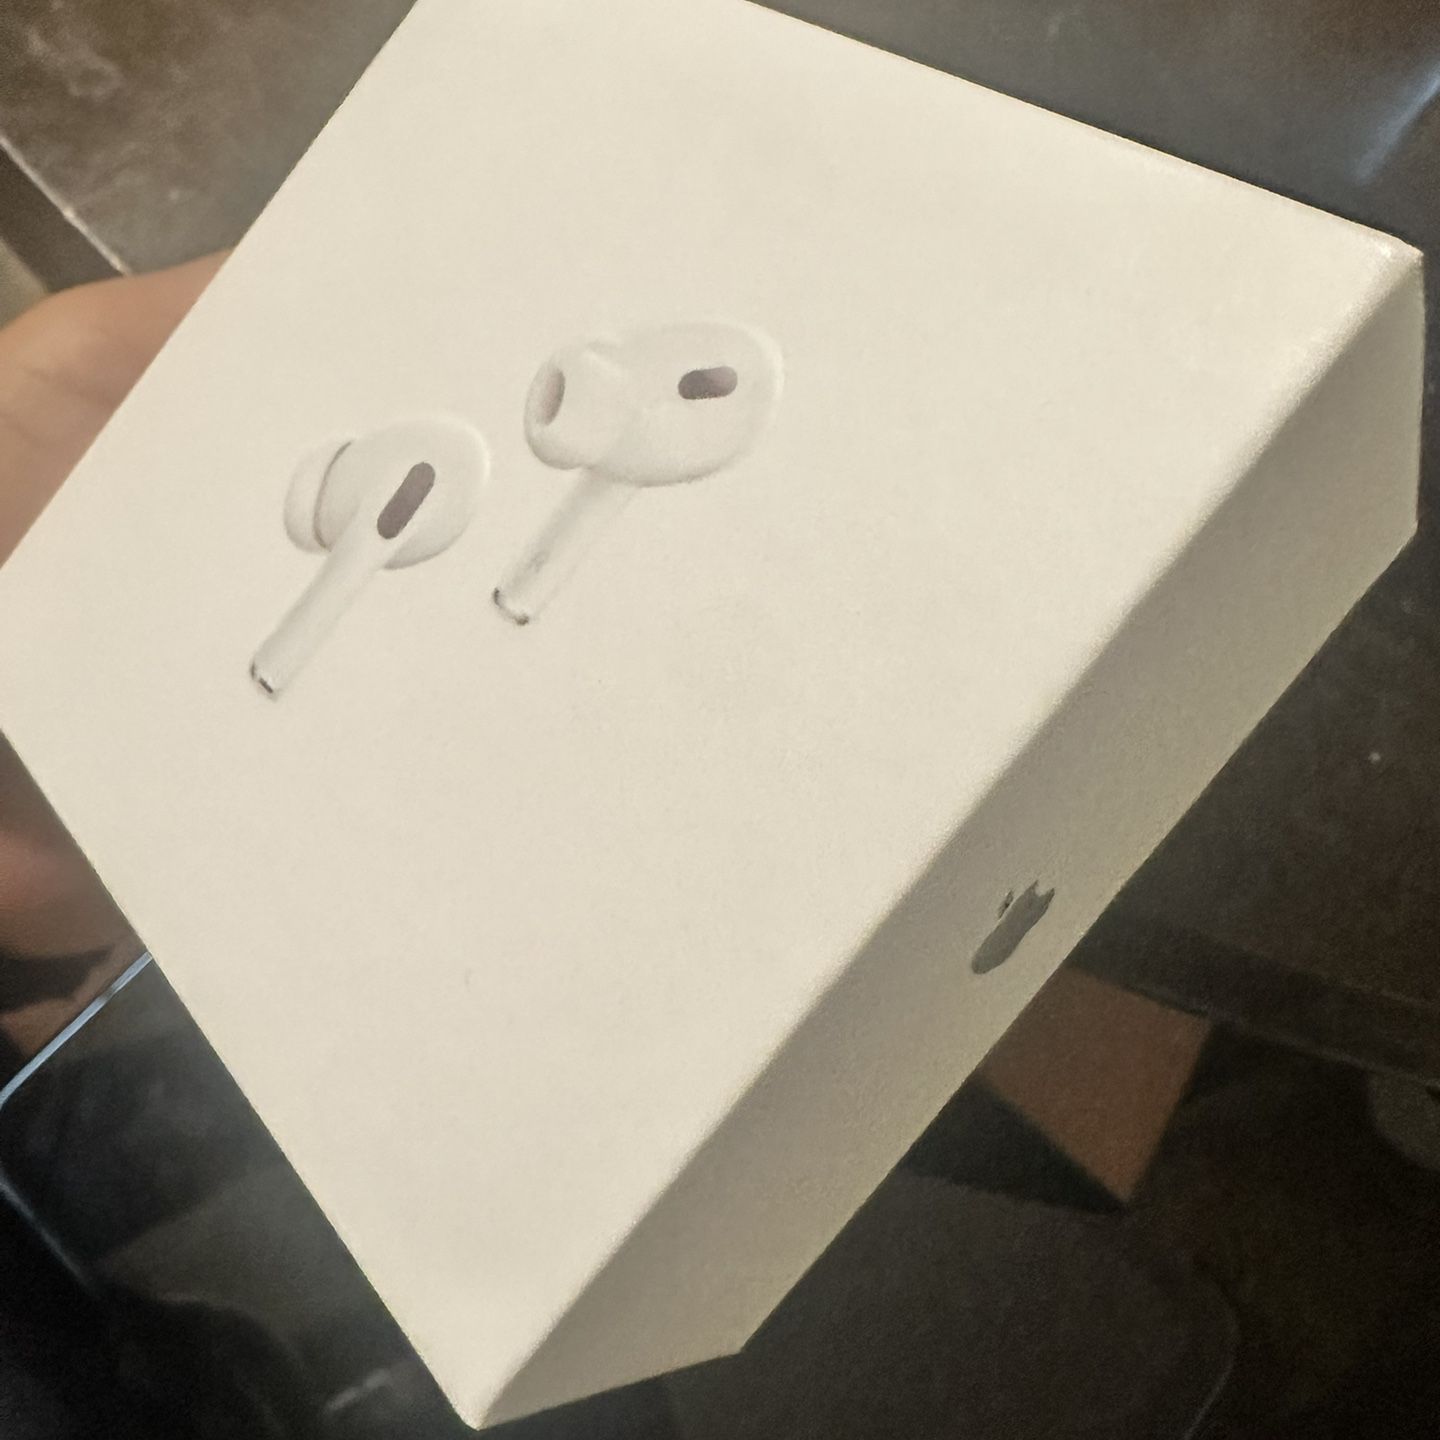 Brand New Apple Airpods Pro 2nd Generation with MagSafe Wireless Charging Case